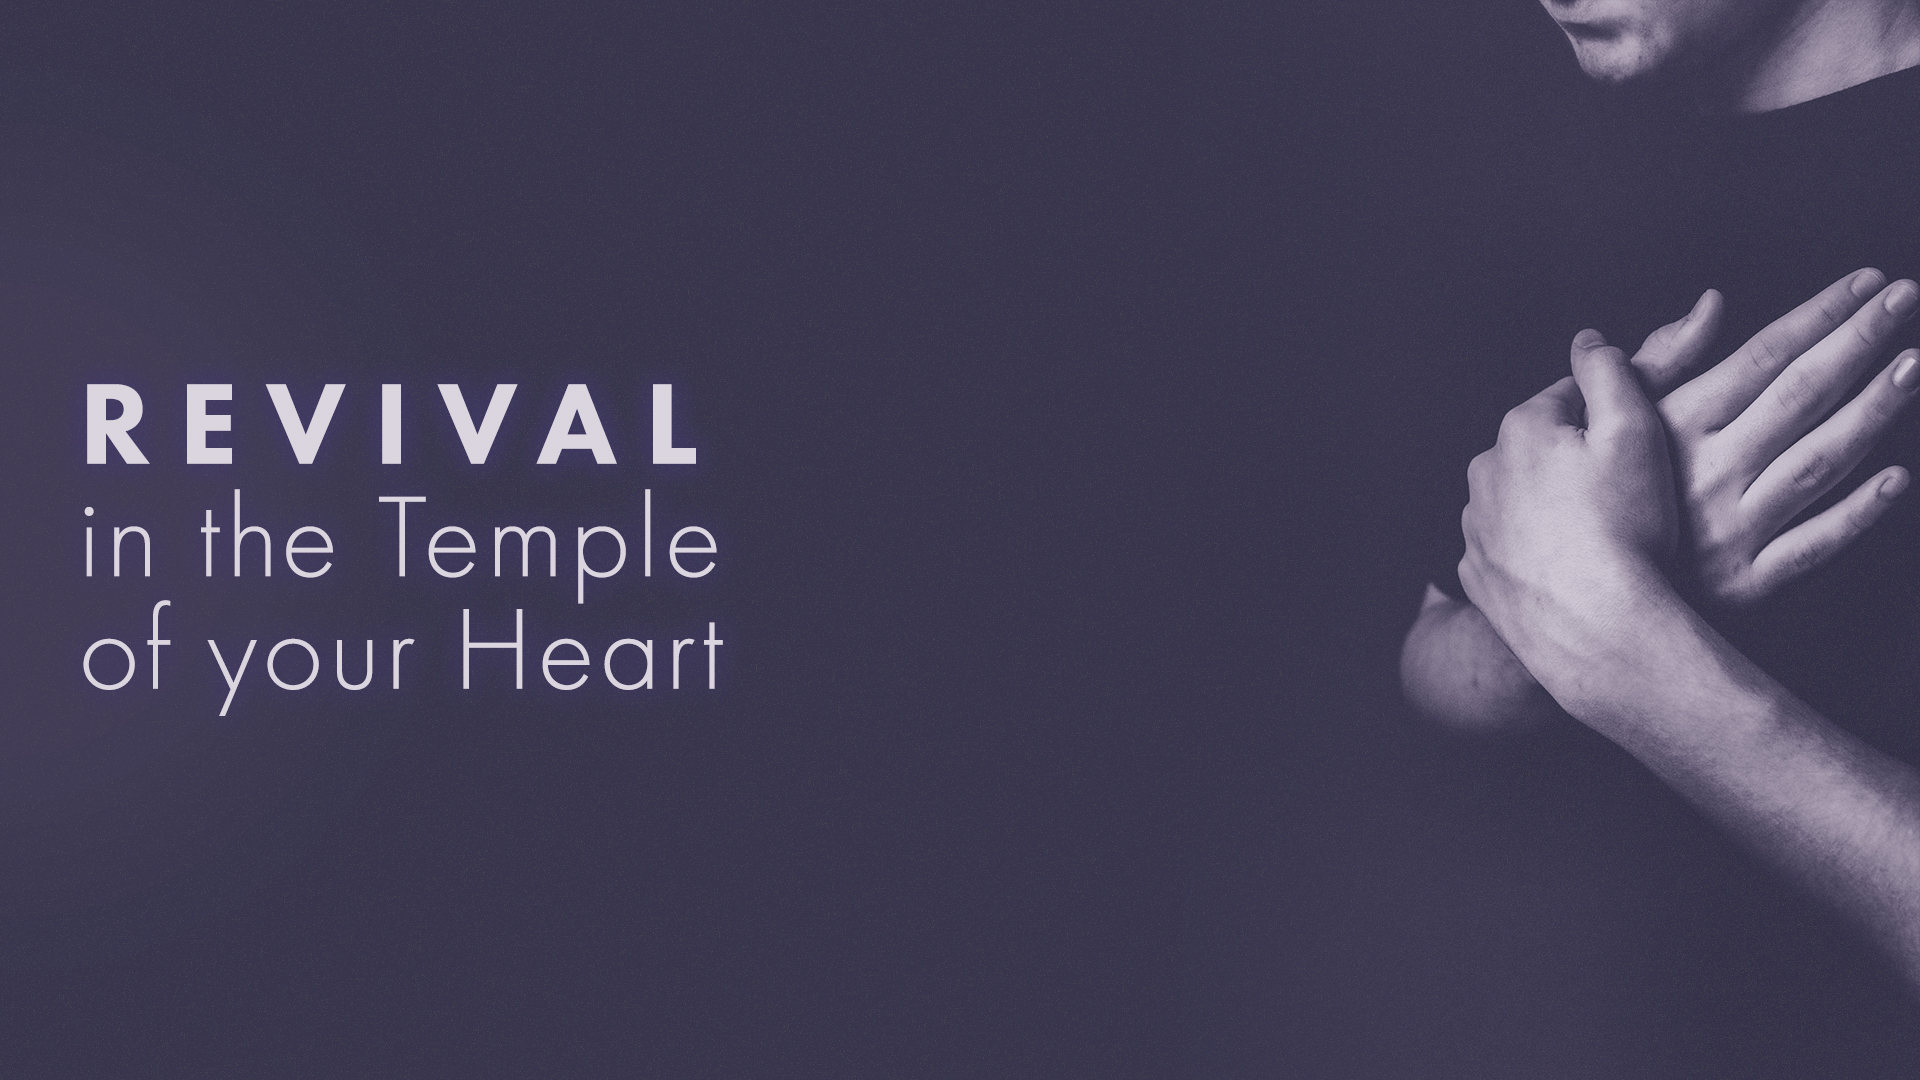 Revival in the Temple of your Heart